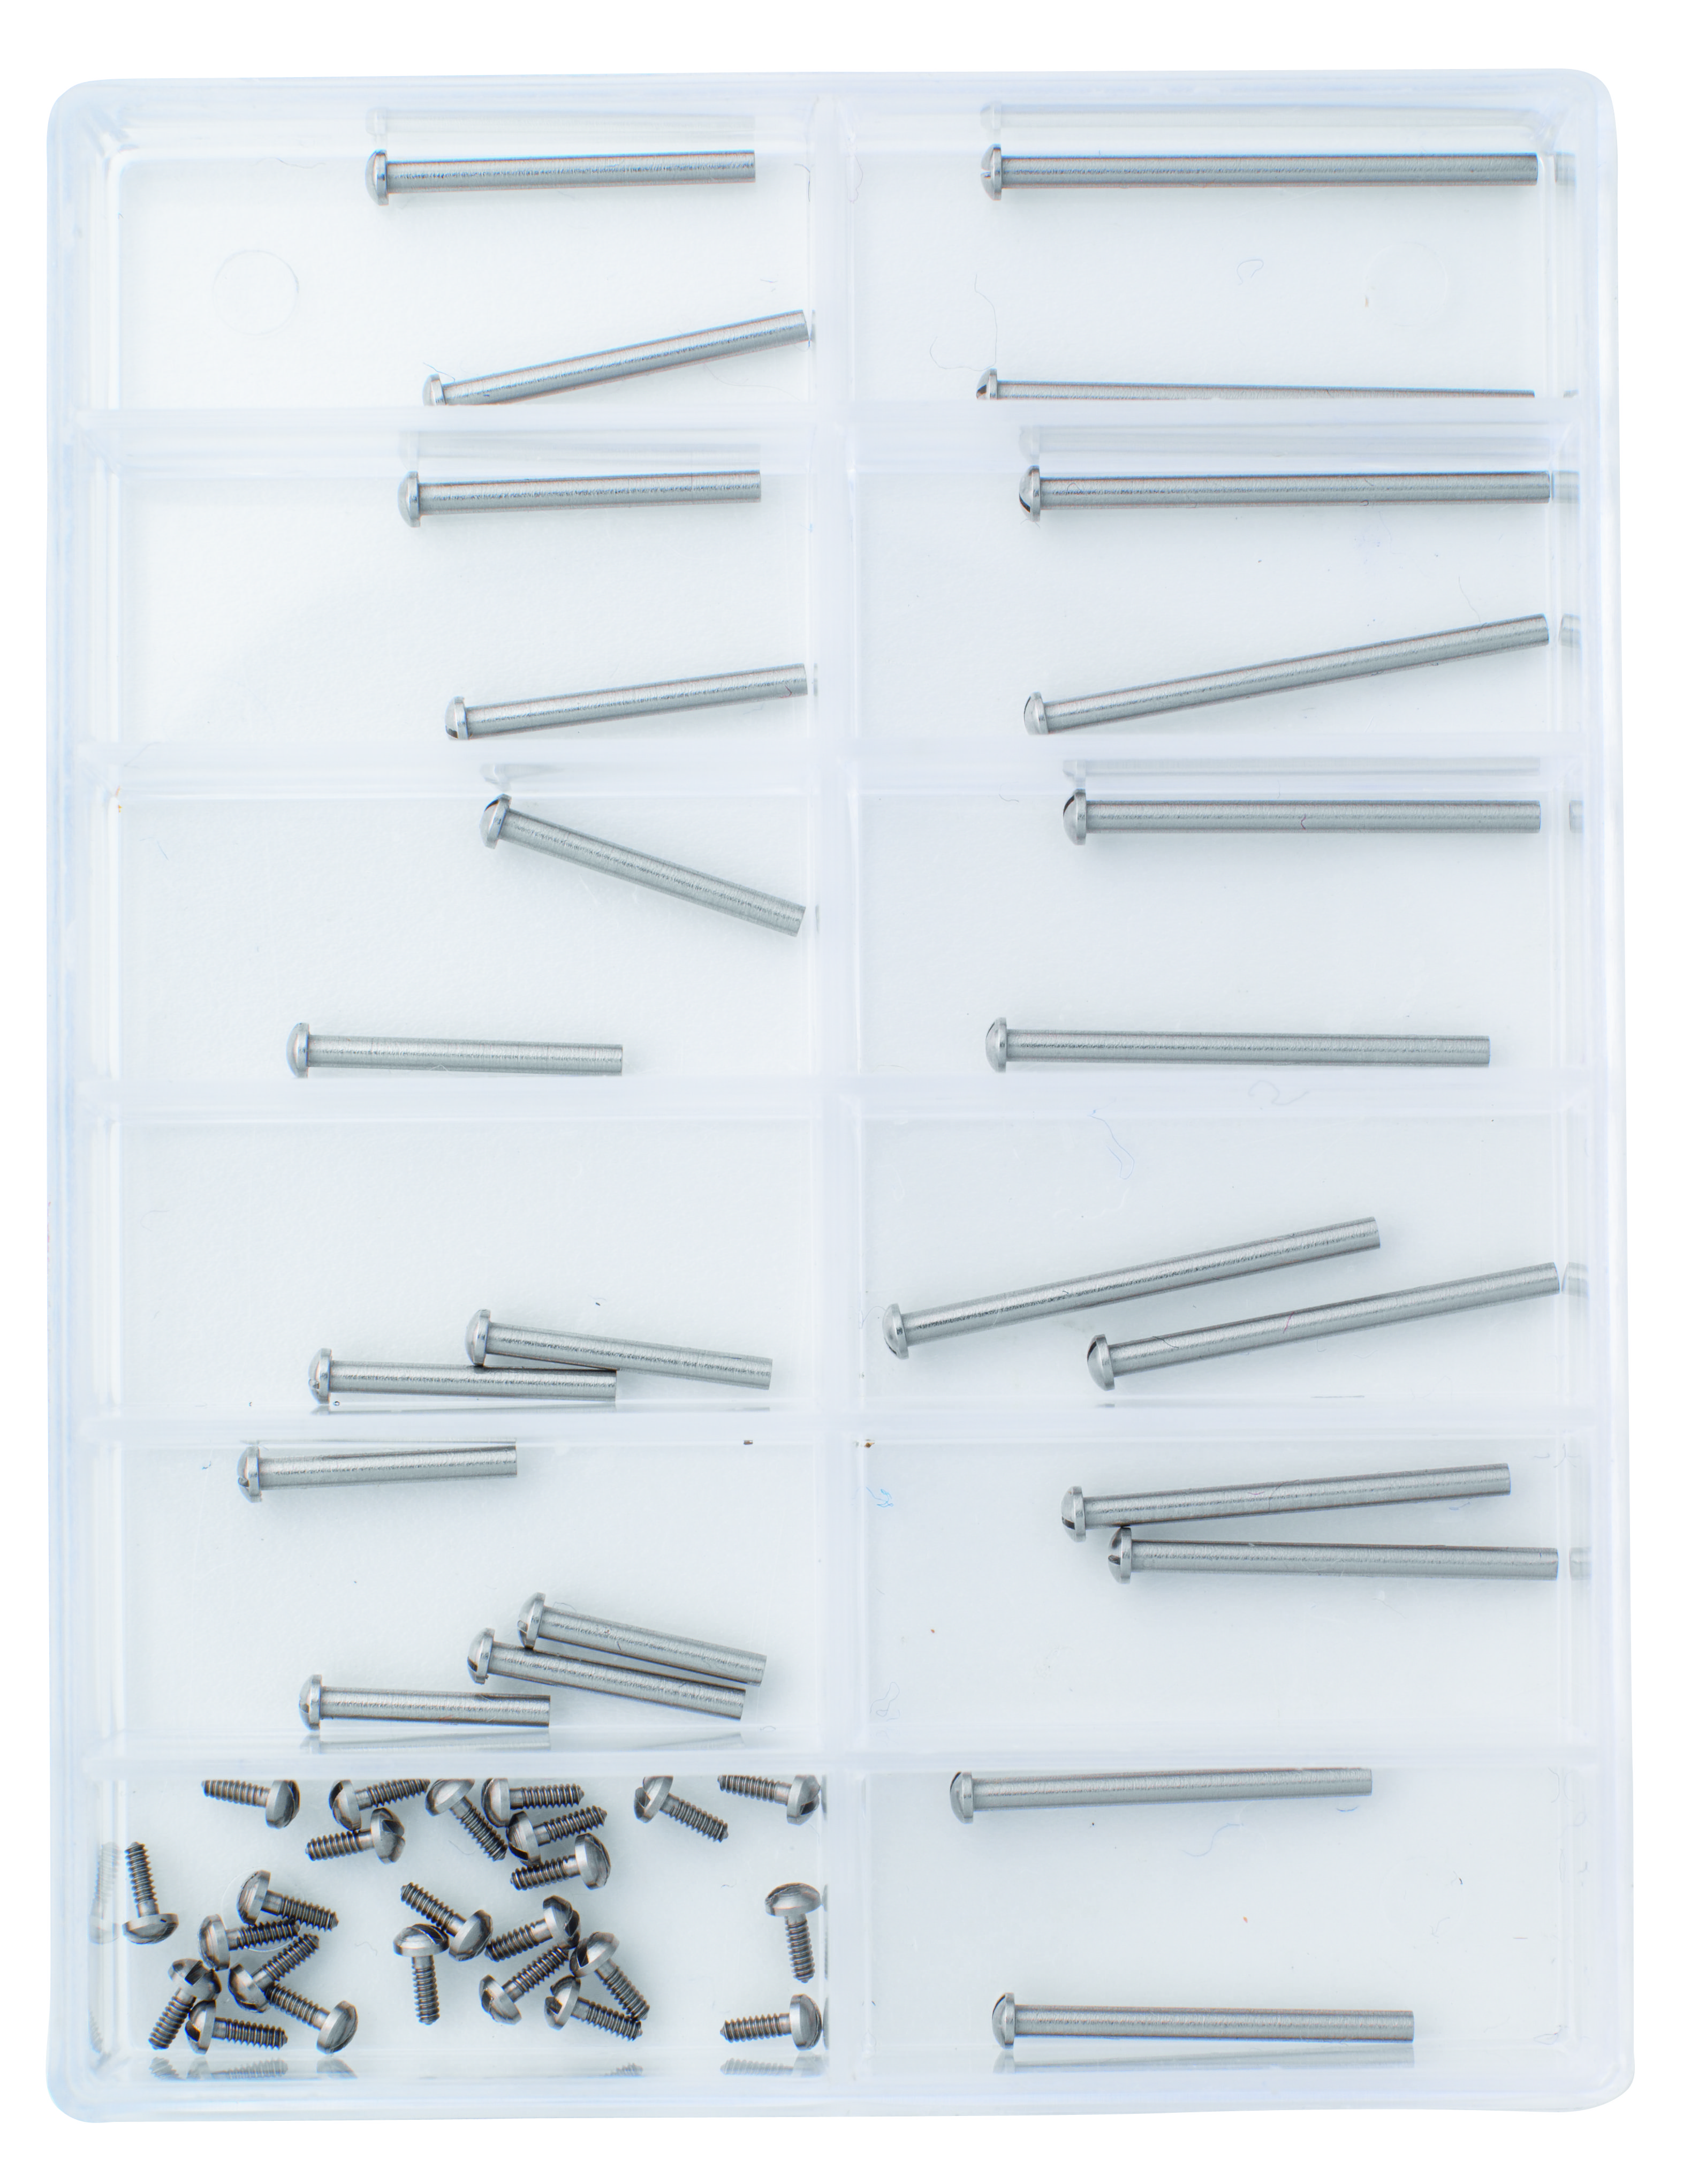 Strap pin assortment, stainless steel, length 8.00-19.00mm, dia. 1.20mm, contents 24 pcs.